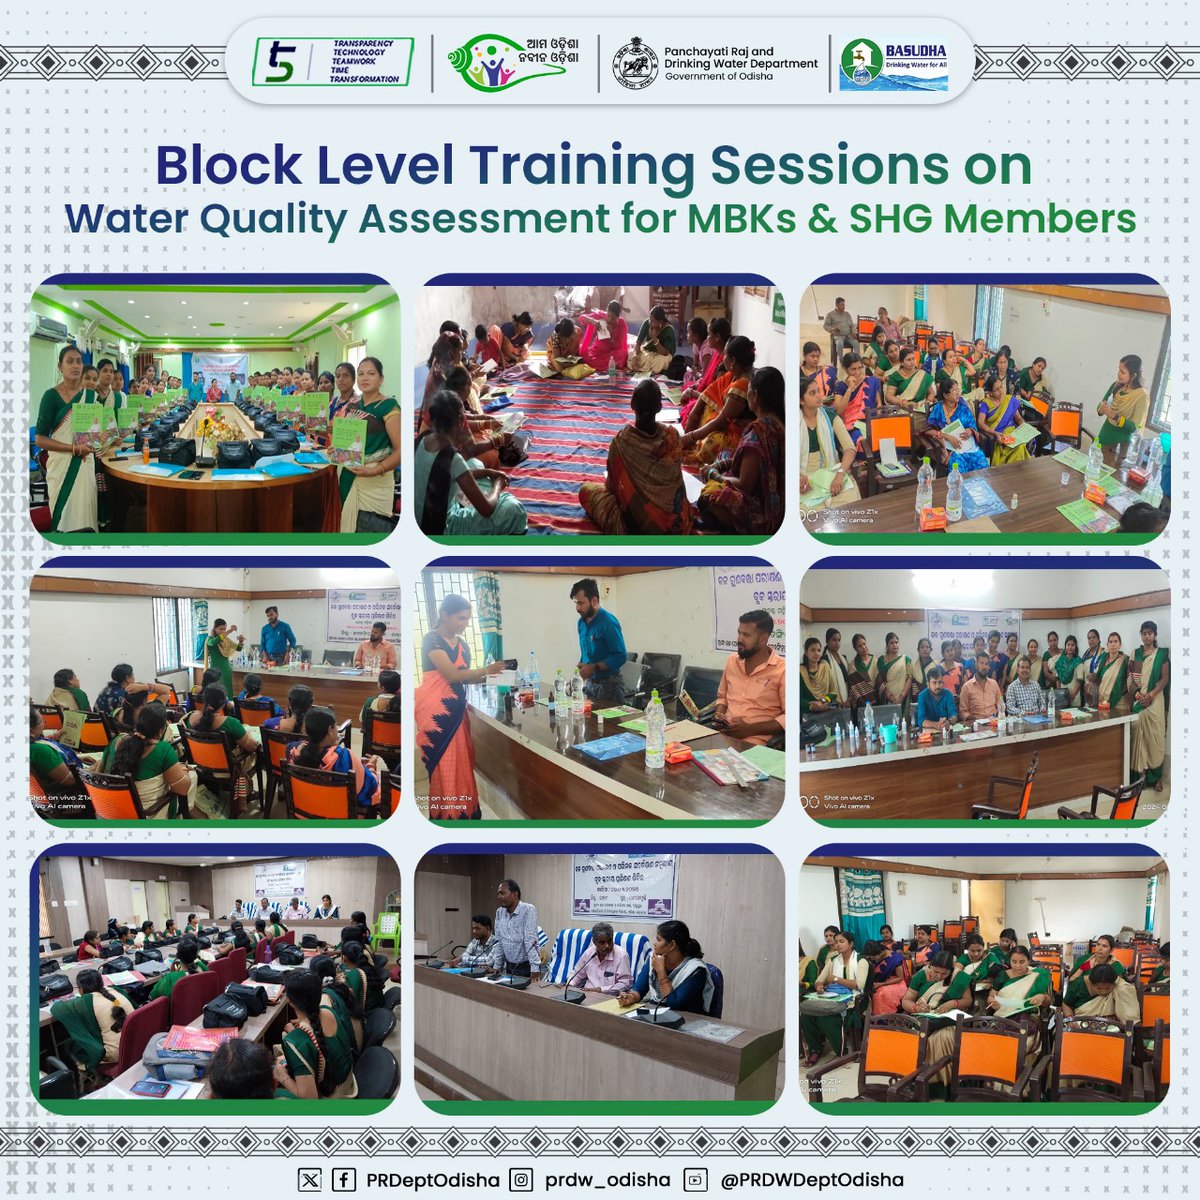 Block-level training sessions on water quality assessment using #FieldTestingKits for #MasterBookKeepers and #SelfHelpGroup members were organised in Ganjam, Koraput, Nuapada, Balangir and Jagatsinghpur districts.
#CleanandSafeDrinkingWaterForAll